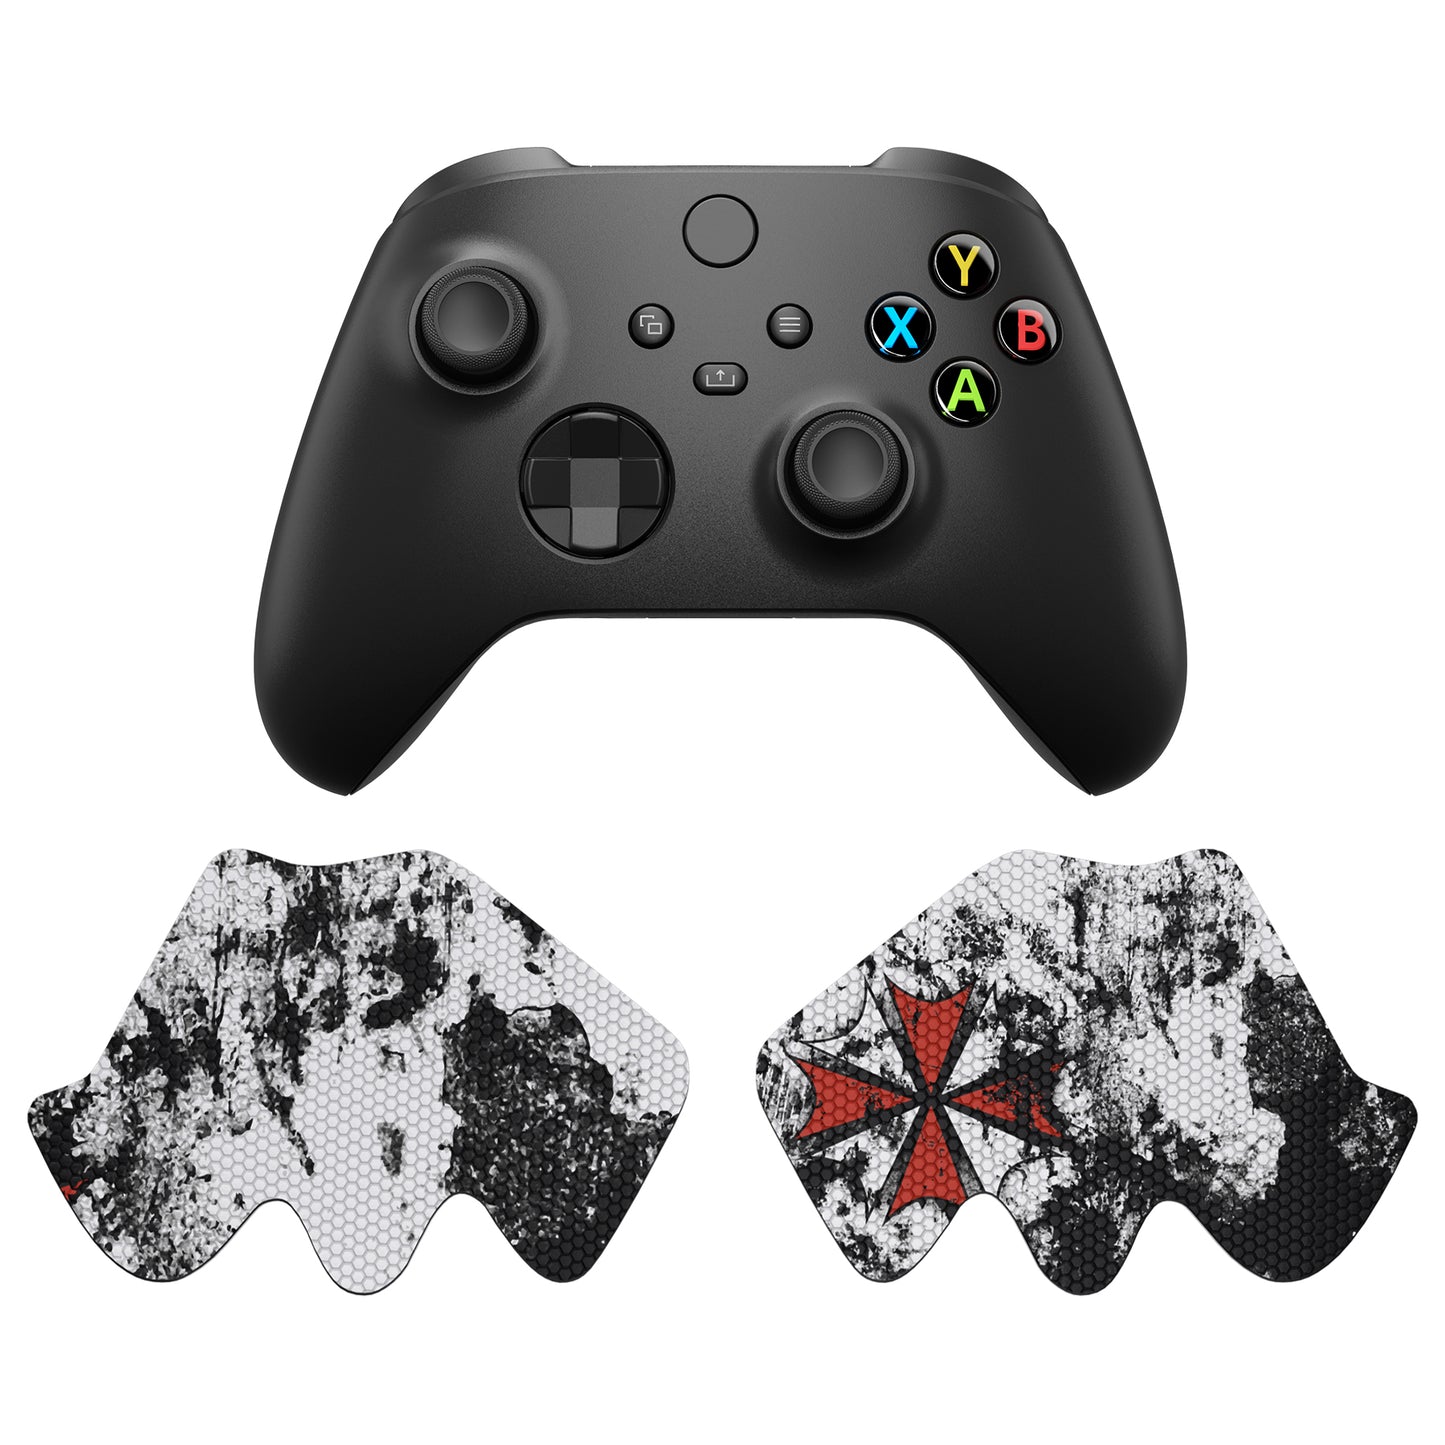 PlayVital Biohazard Anti-Skid Sweat-Absorbent Controller Grip for Xbox Series X/S Controller, Professional Textured Soft Rubber Pads Handle Grips for Xbox Series X/S Controller - X3PJ042 PlayVital